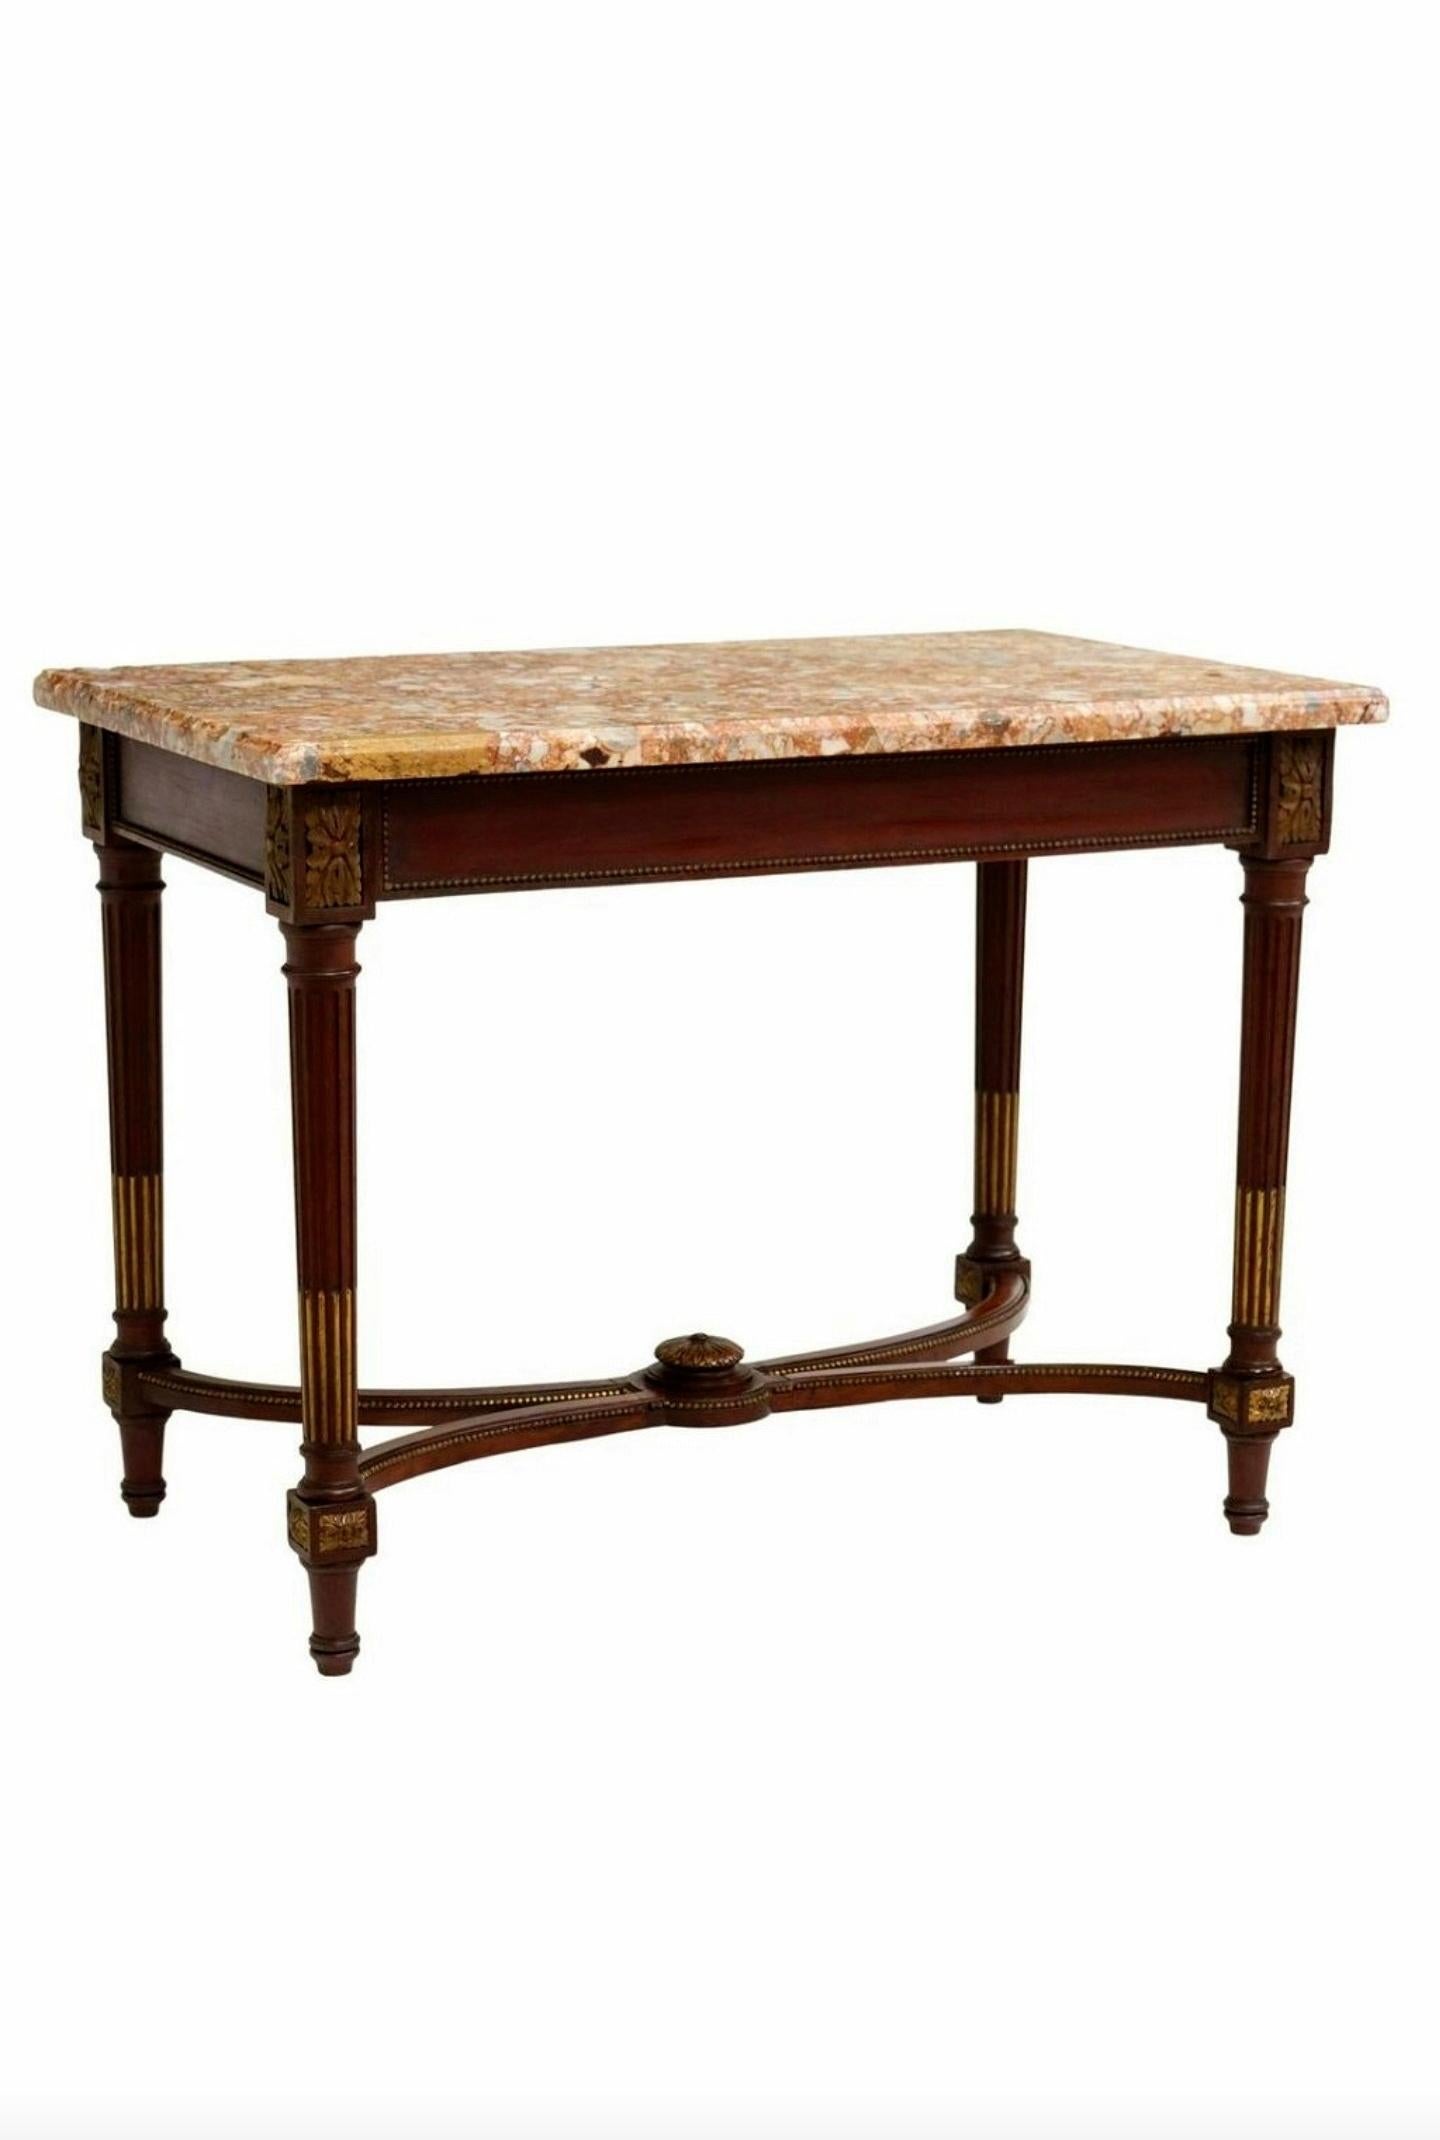 20th Century Antique French Louis XVI Style Mahogany Marble-Top Center Table For Sale